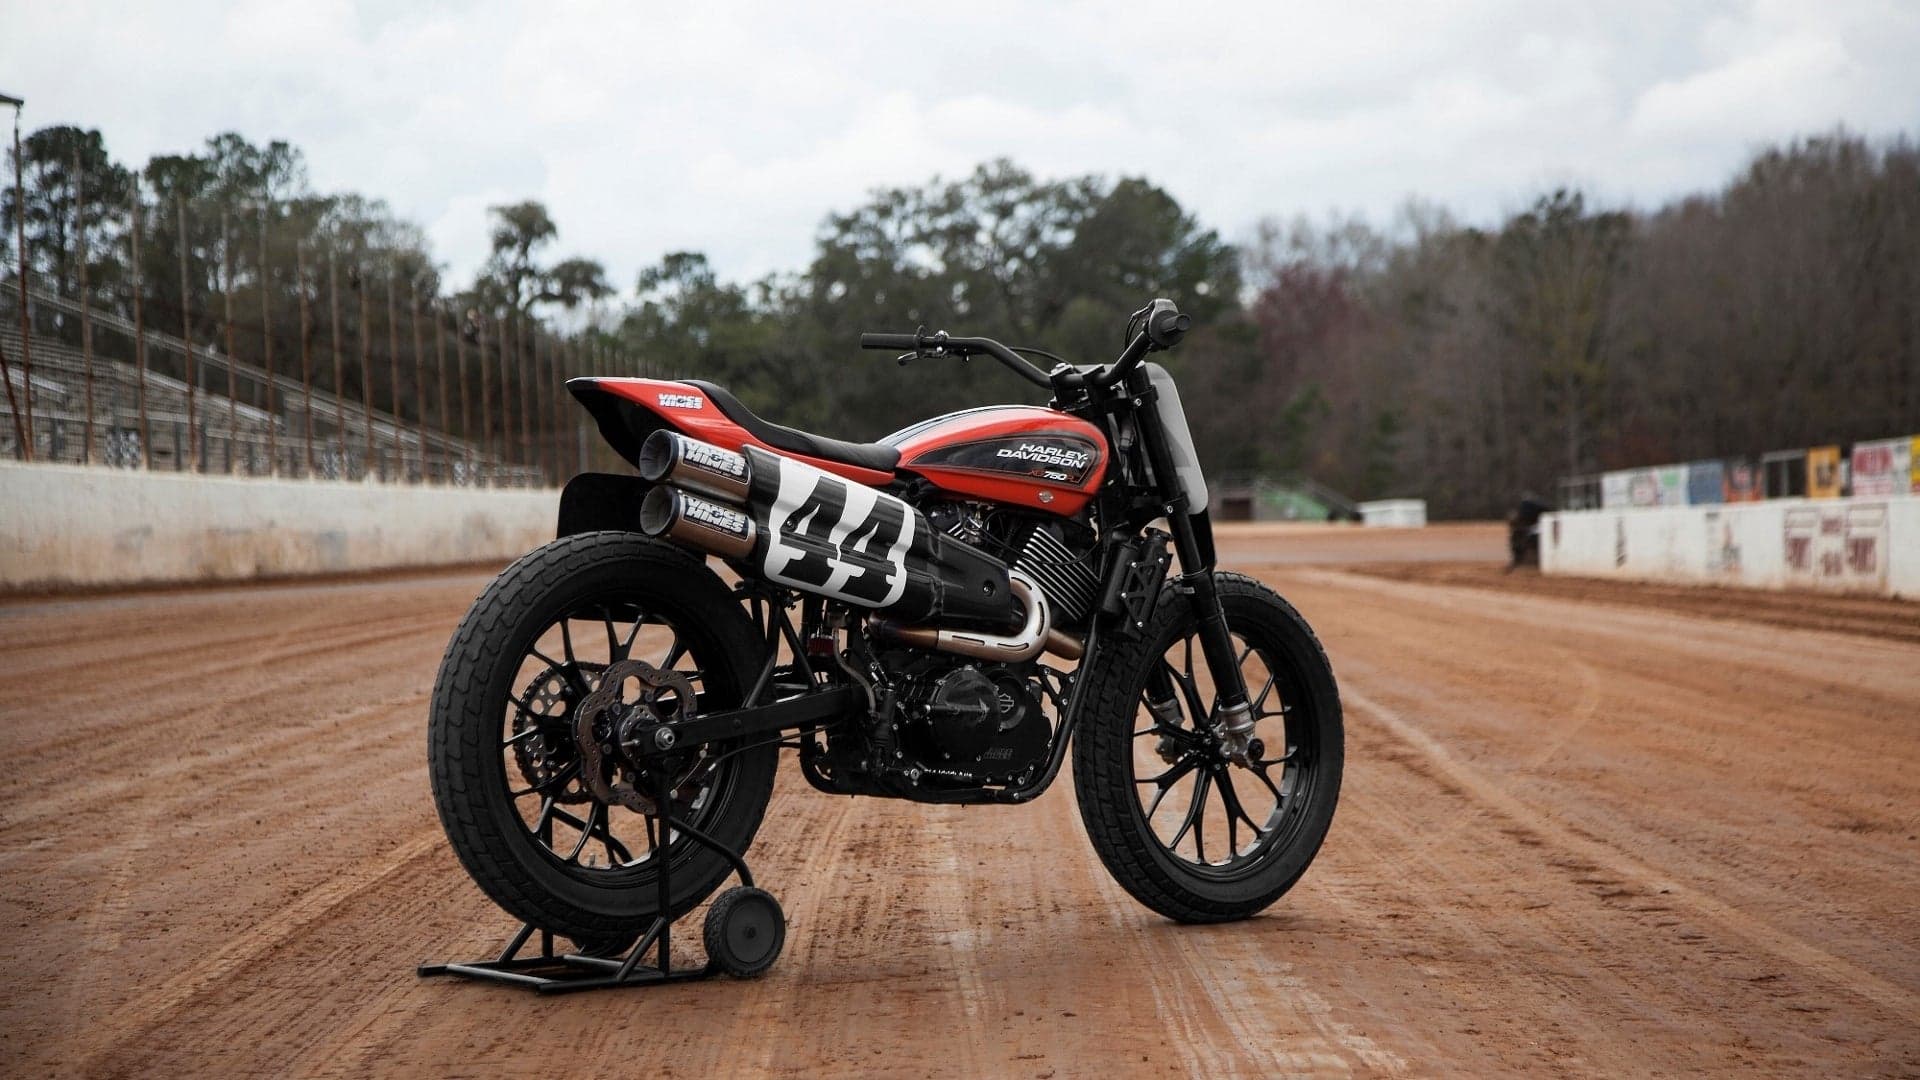 Harley-Davidson is Upping Its Game for American Flat Track Racing